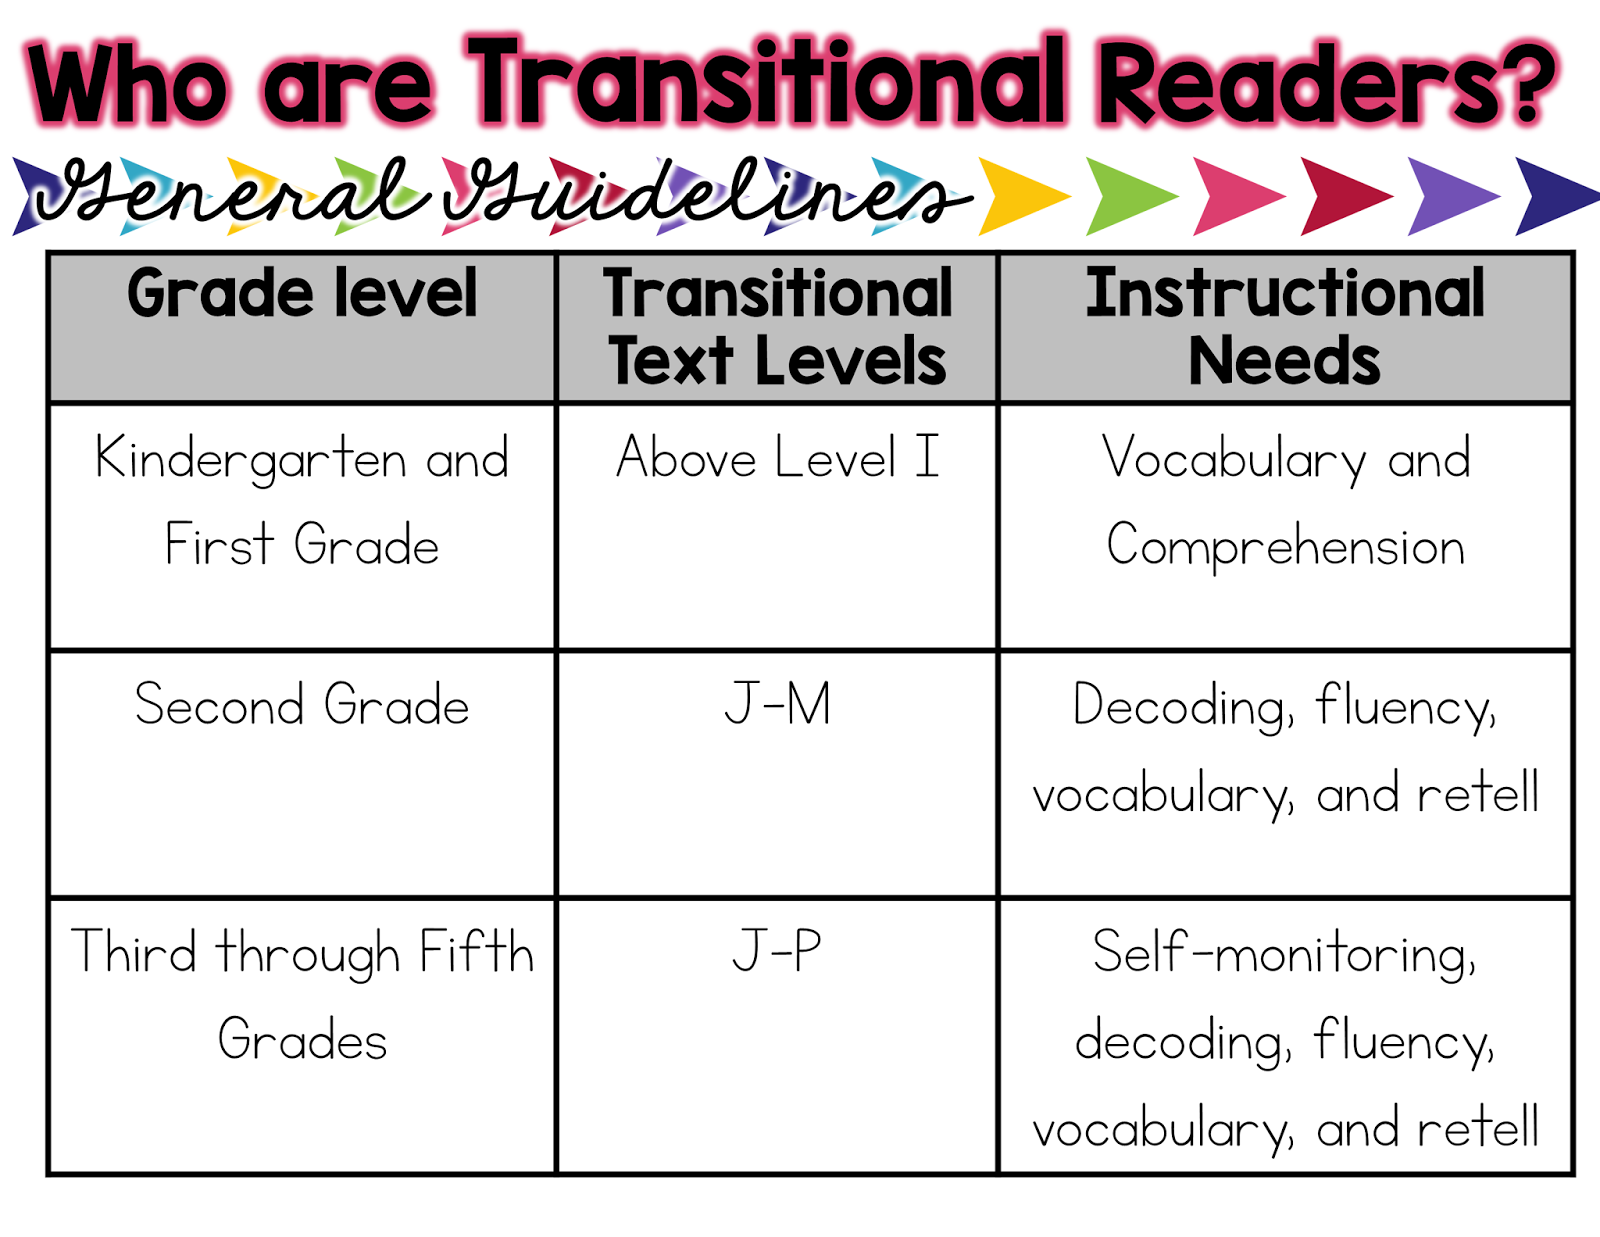 Txt level. Instructional texts. Levels of reading Fluency. Reading Lesson Plan. Types of Readers in Grade 1.